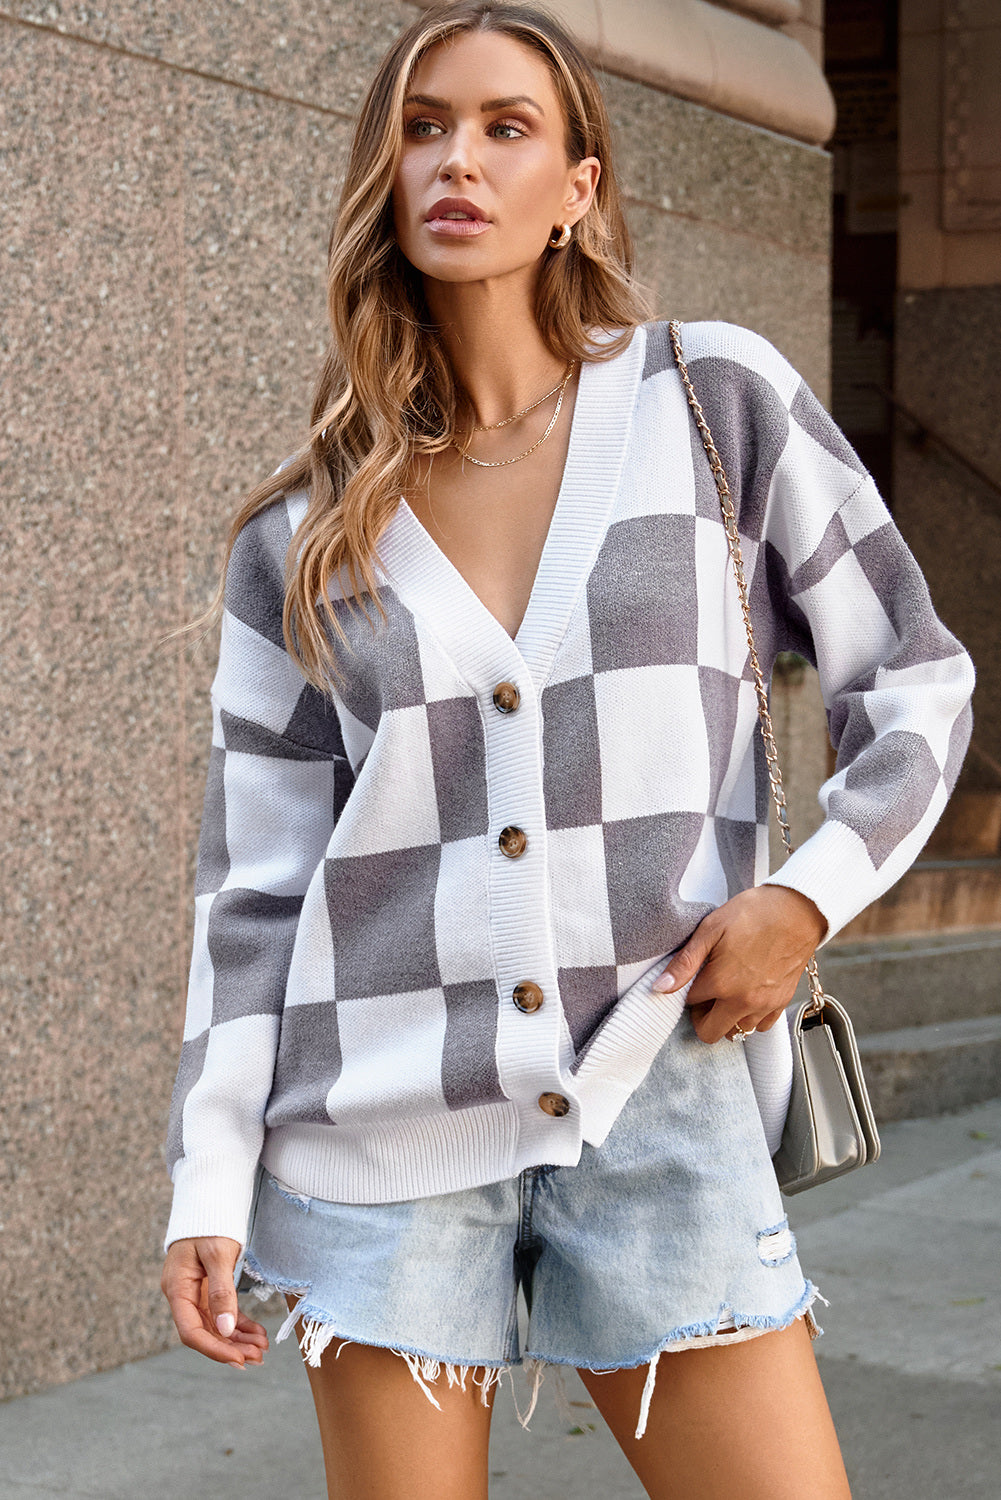 LC271943-11-S, LC271943-11-M, LC271943-11-L, LC271943-11-XL, LC271943-11-2XL, Gray Contrast Checkered Print Button Up Sweater Cardigan 